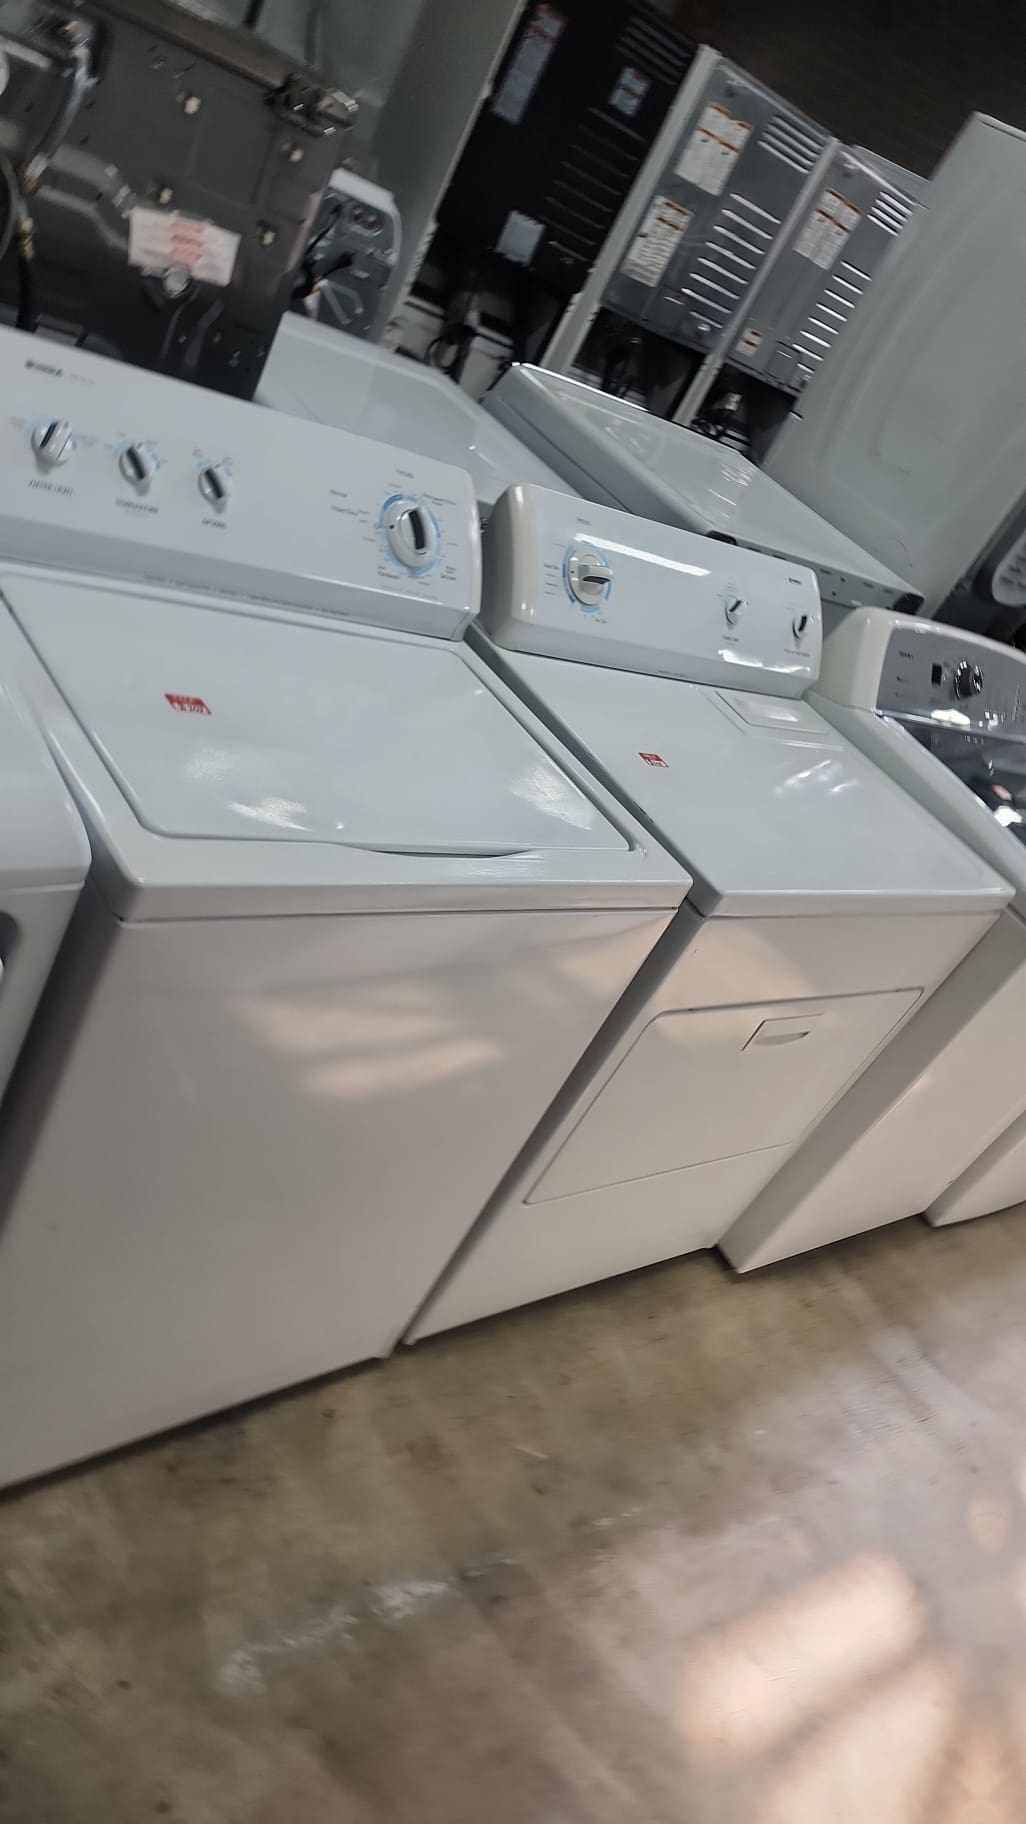 Kenmore Used Washer Dryer Set – White